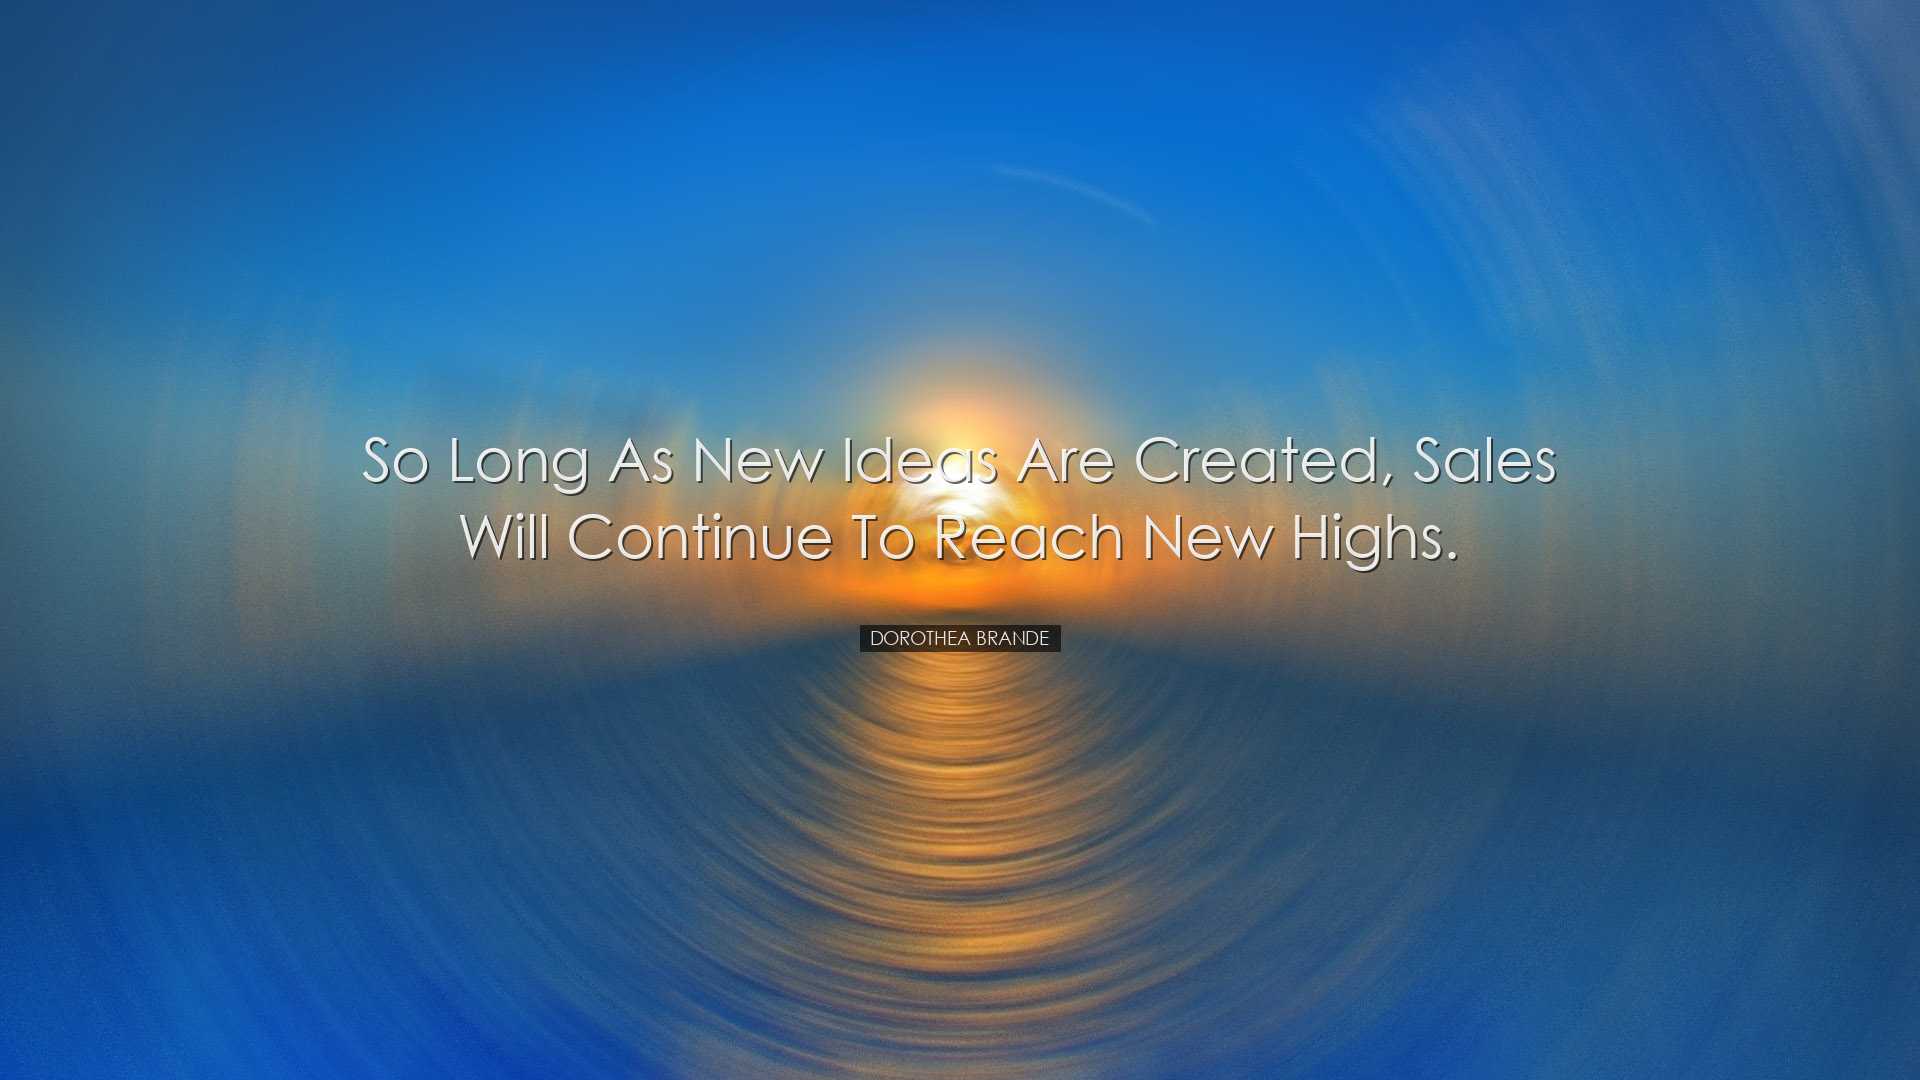 So long as new ideas are created, sales will continue to reach new